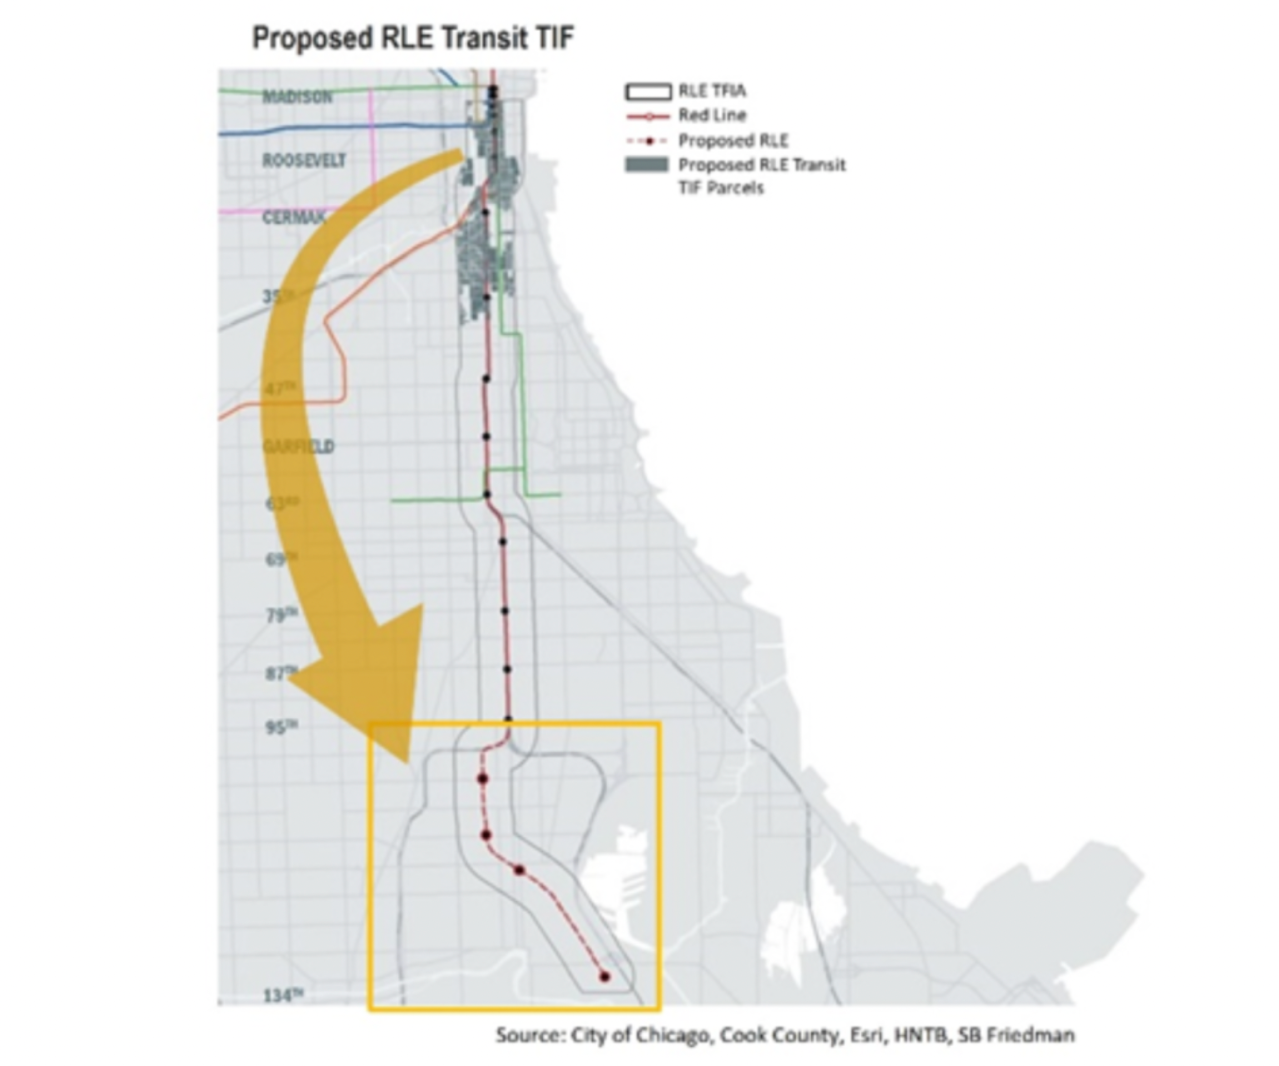 The city of Chicago is proposing to fund the Red Line Extension on the Far South Side with TIF funds from downtown and the Near South Side. Image: City of Chicago